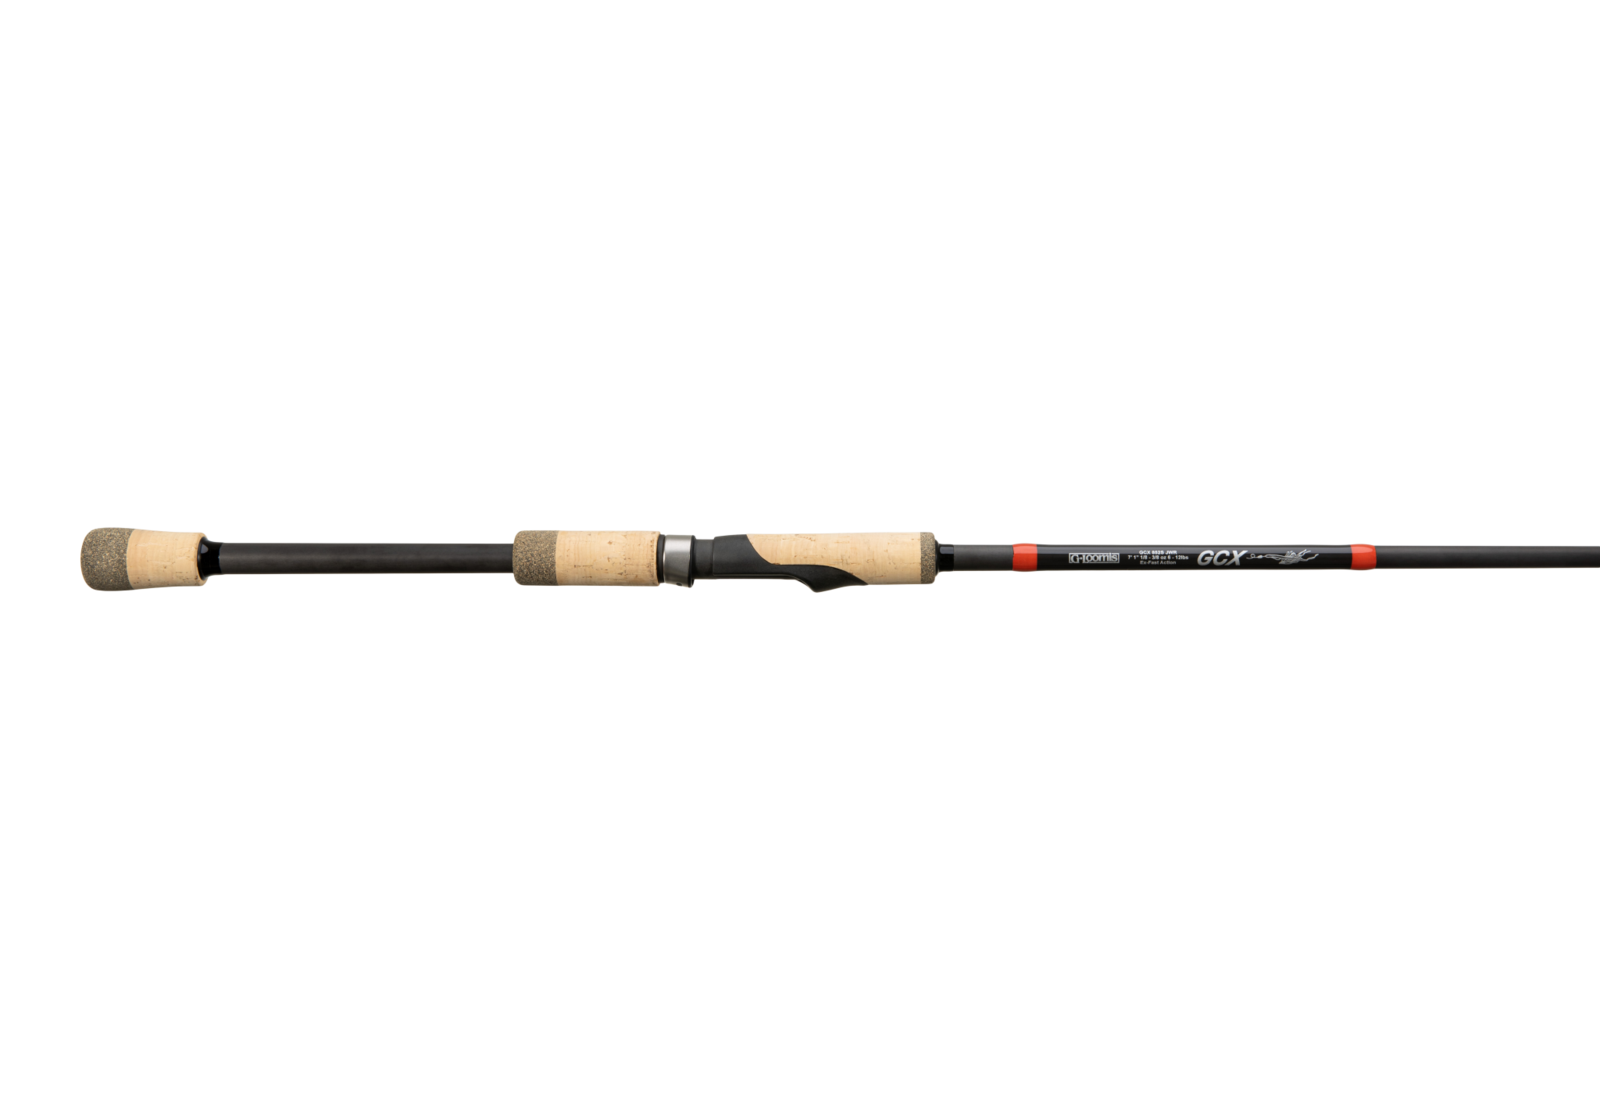 G. Loomis IMX Pro Spinning Rods - LOTWSHQ